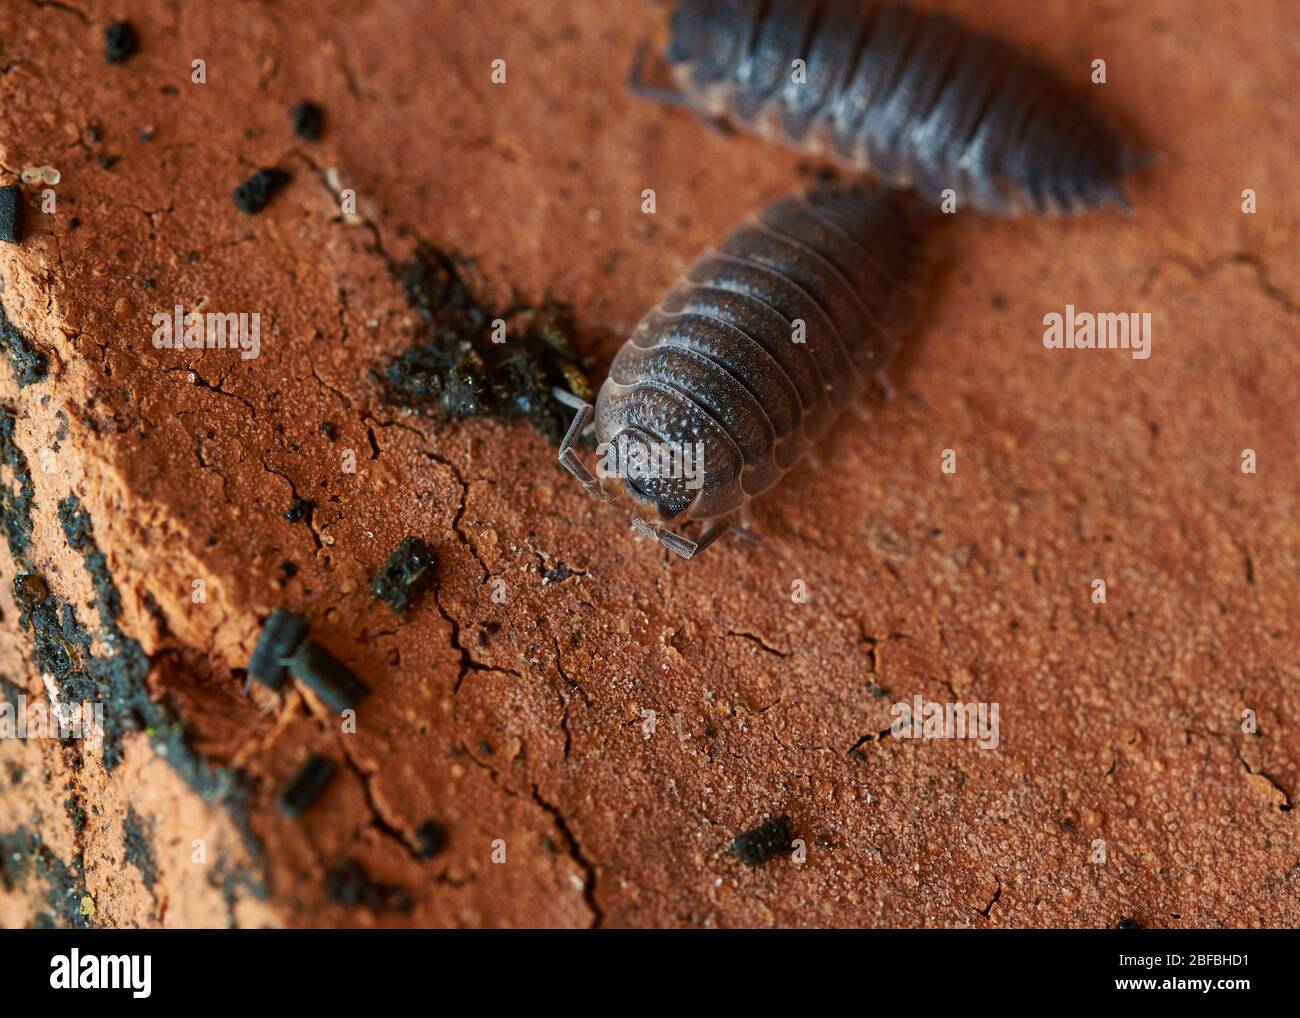 A close-up view of Woodlice (Trachelipus rathkii) crawling on a grimy red brick. Stock Photo